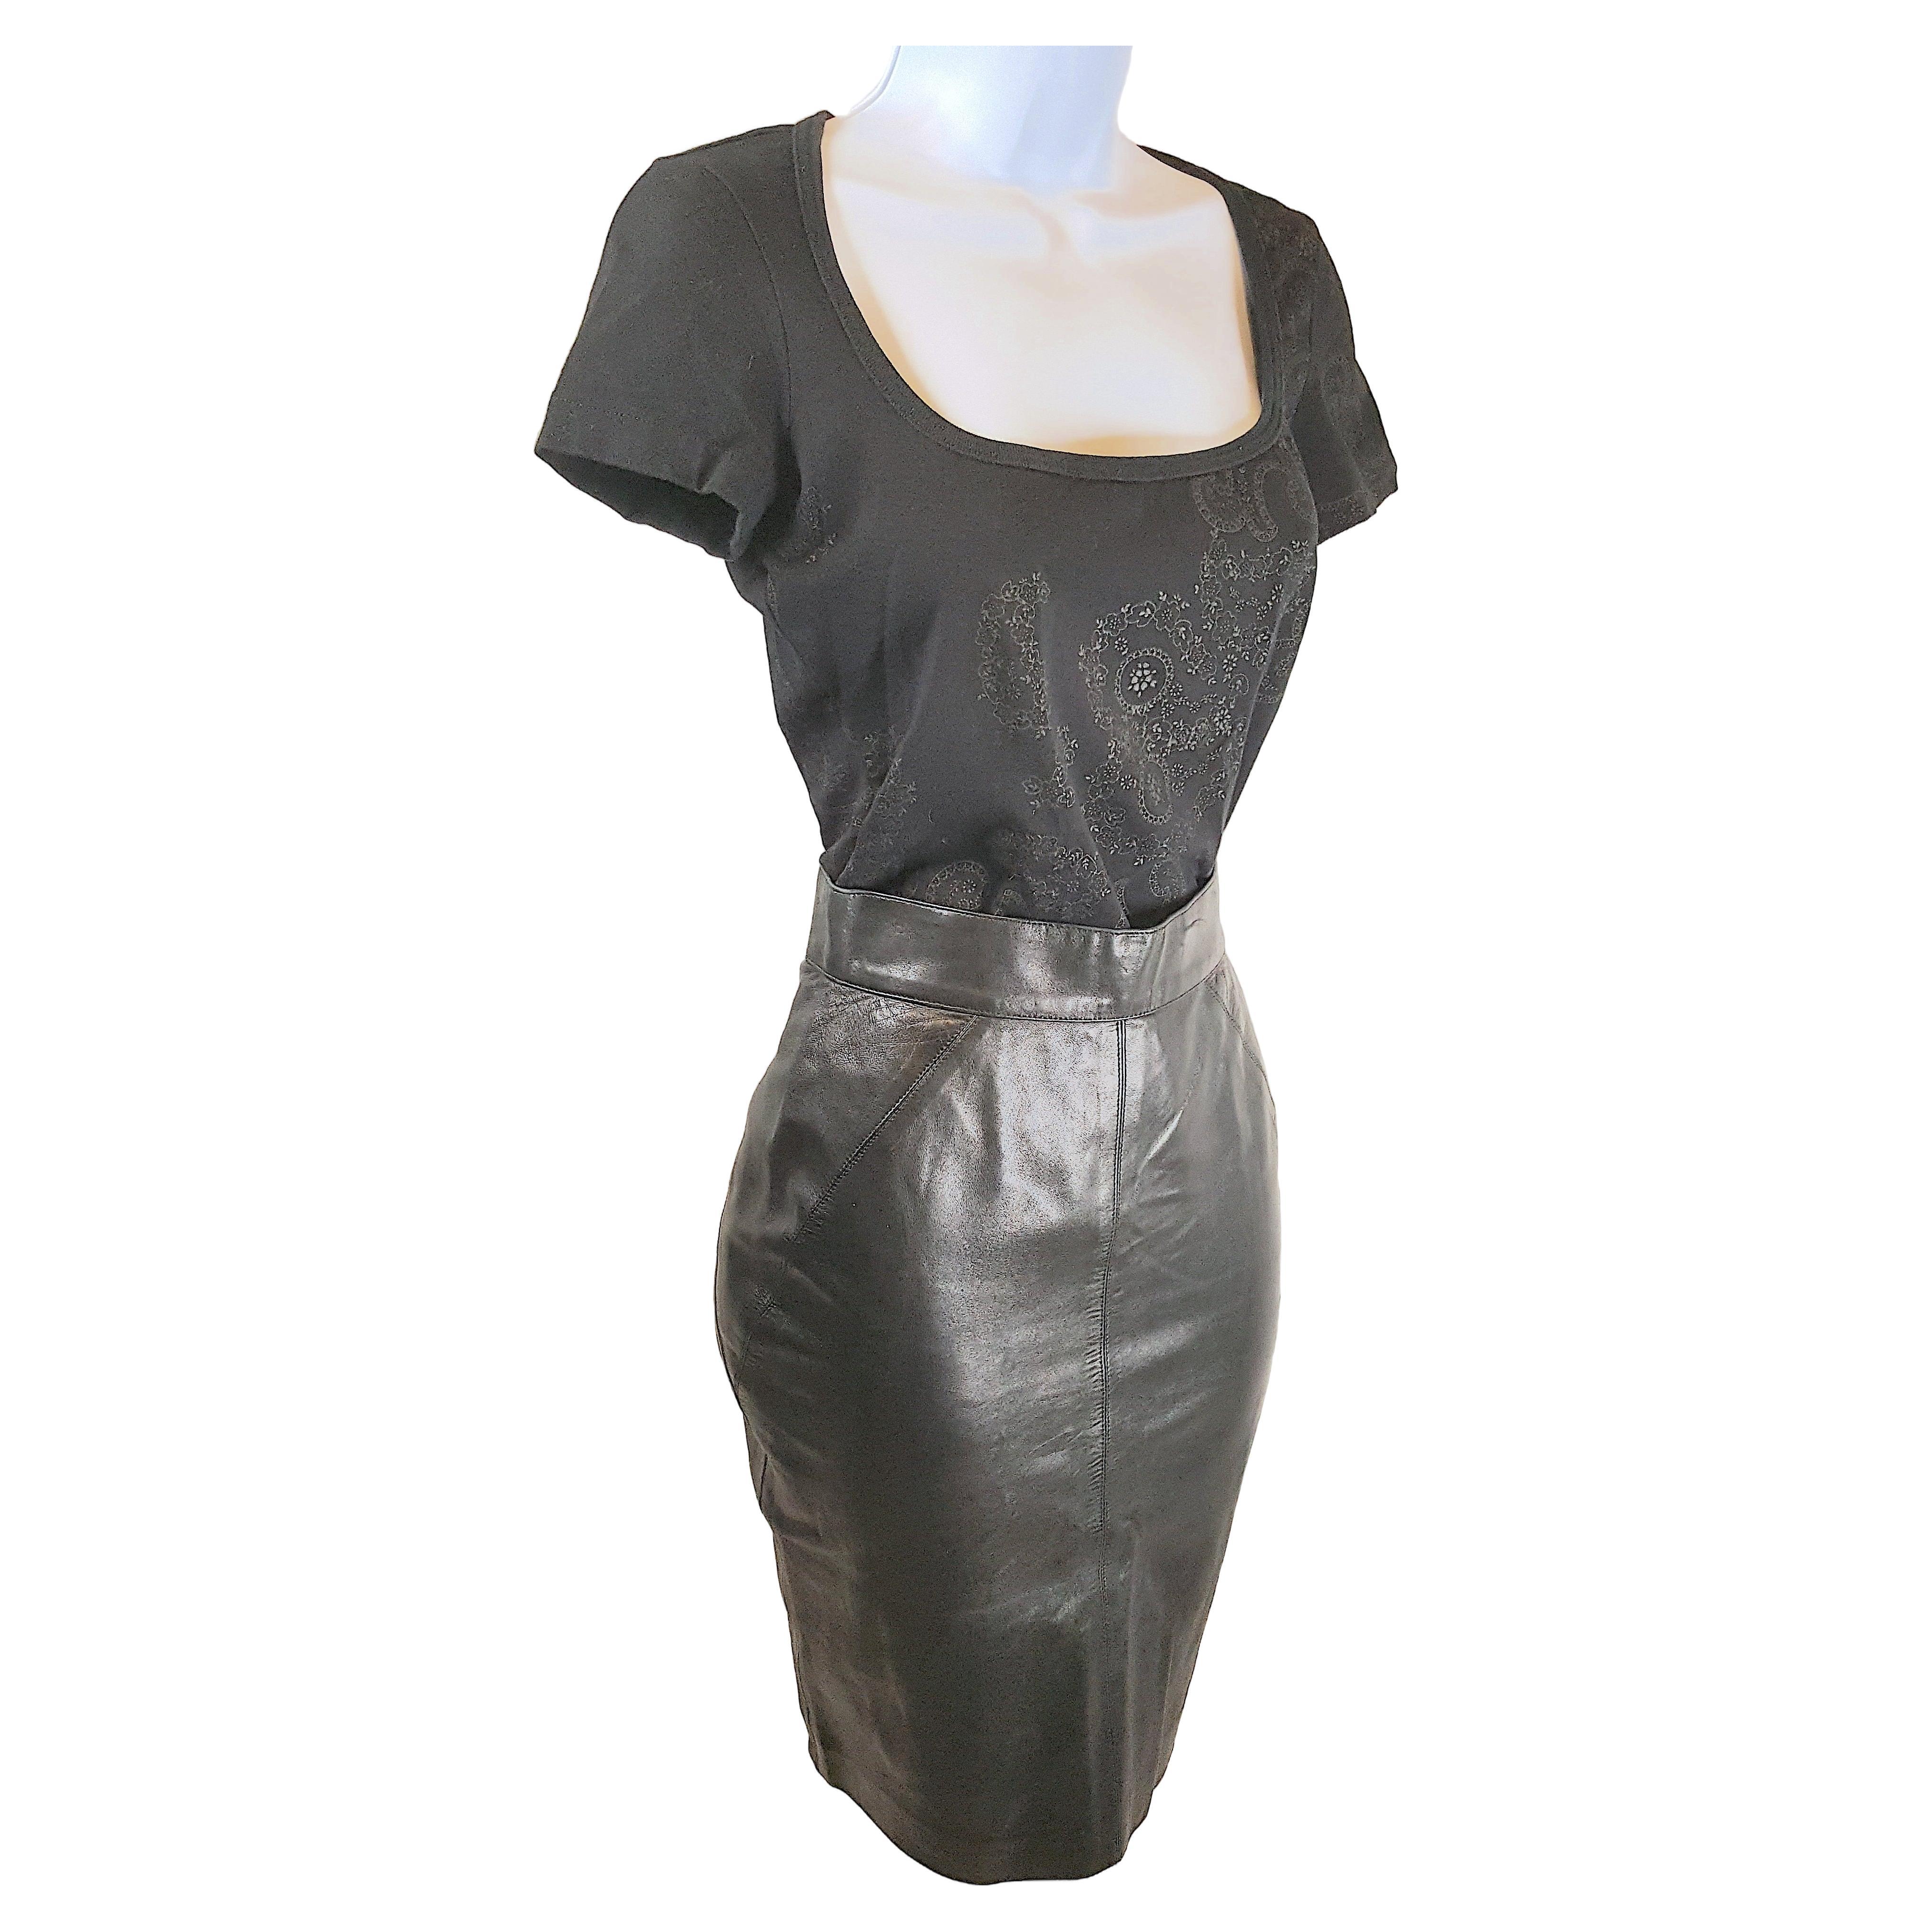 This Alaia Paris black set of a very soft 100% leather high-waisted derriere-enhancing pencil mini skirt and rare logo scoop-neck T-shirt were made around the early 1990s. The stretch top features an asymmetric stenciled shiny screenprint in a